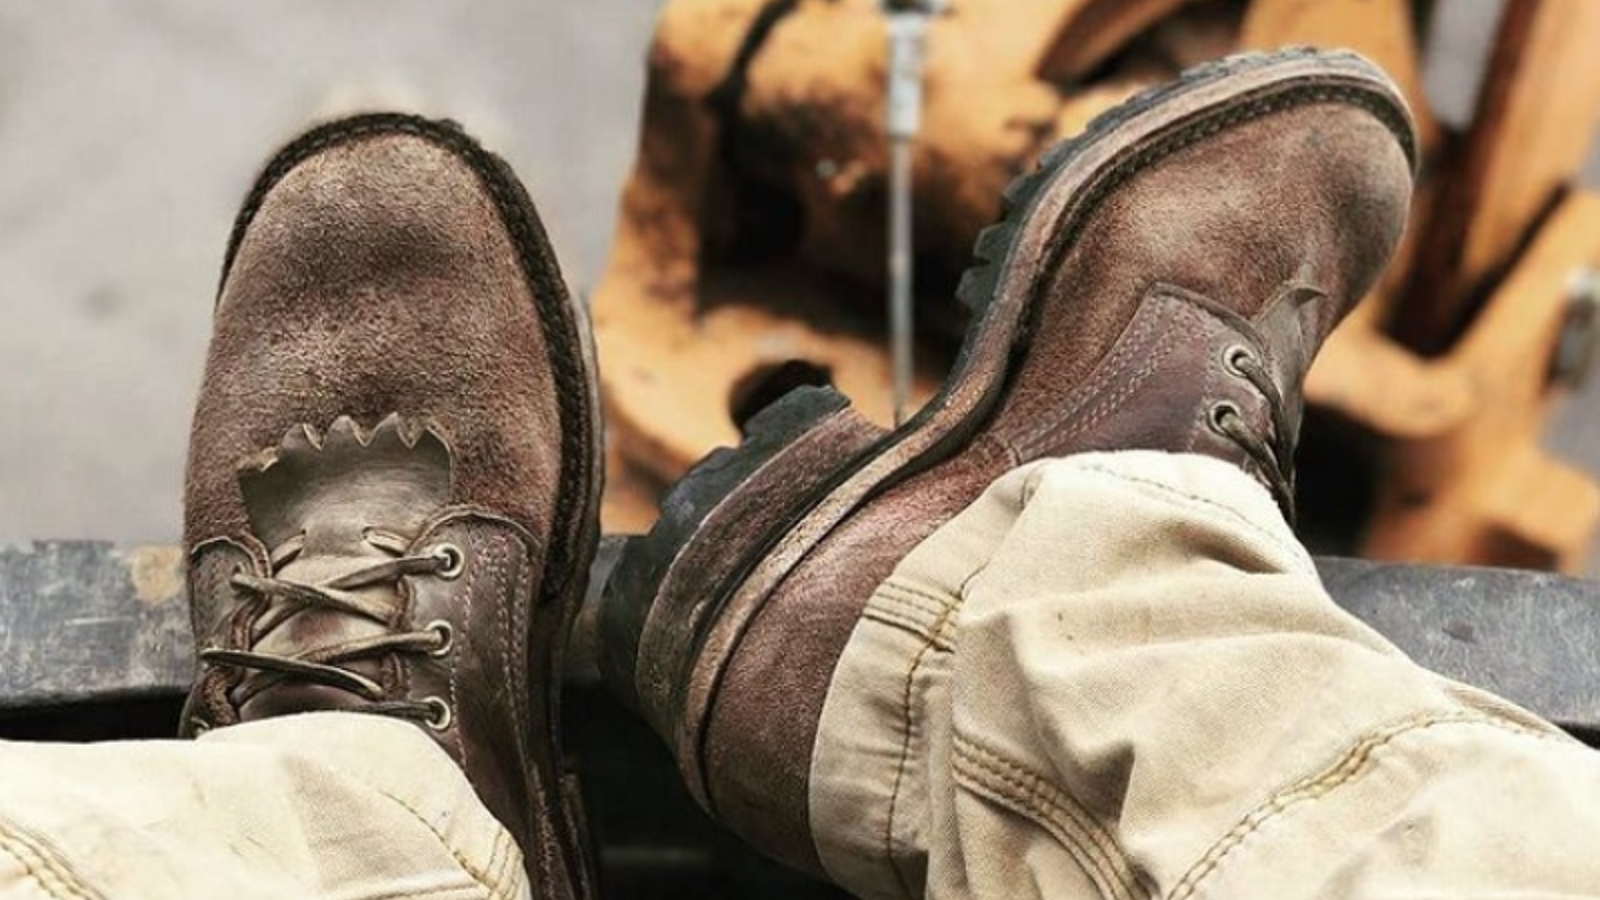 The Suitability Of Heavy Duty Work Boots For Daily Wear